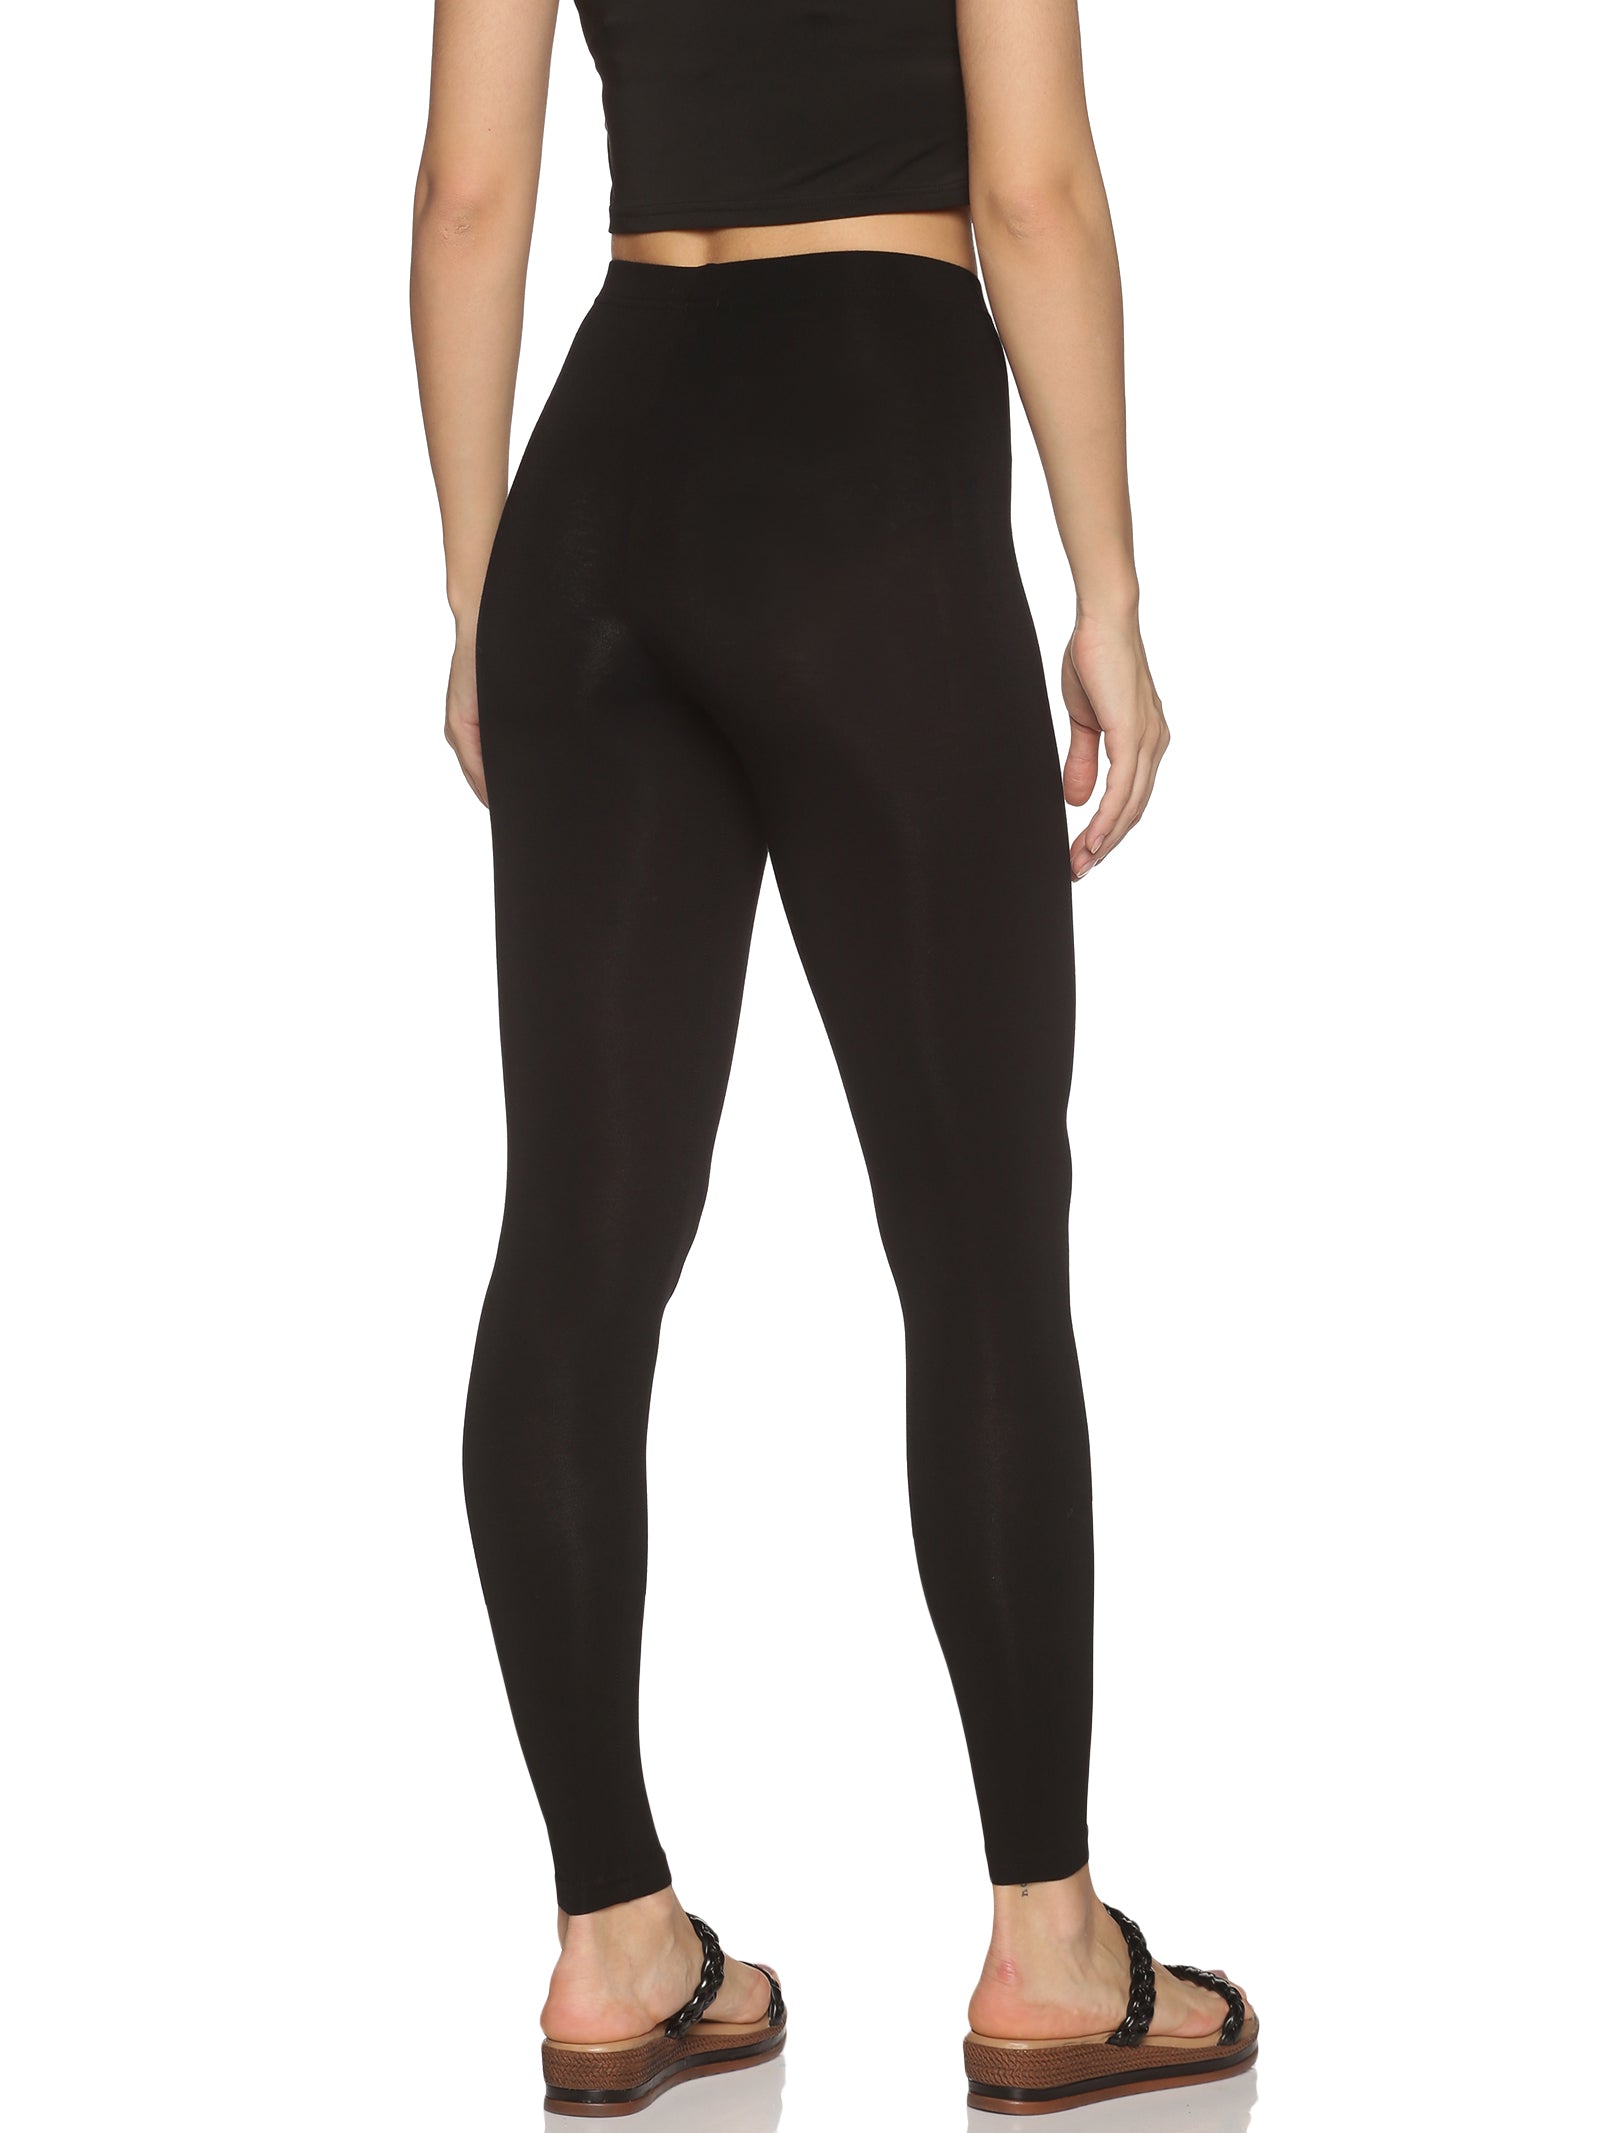 Are there any advantages of wearing black spandex leggings for women? -  Quora